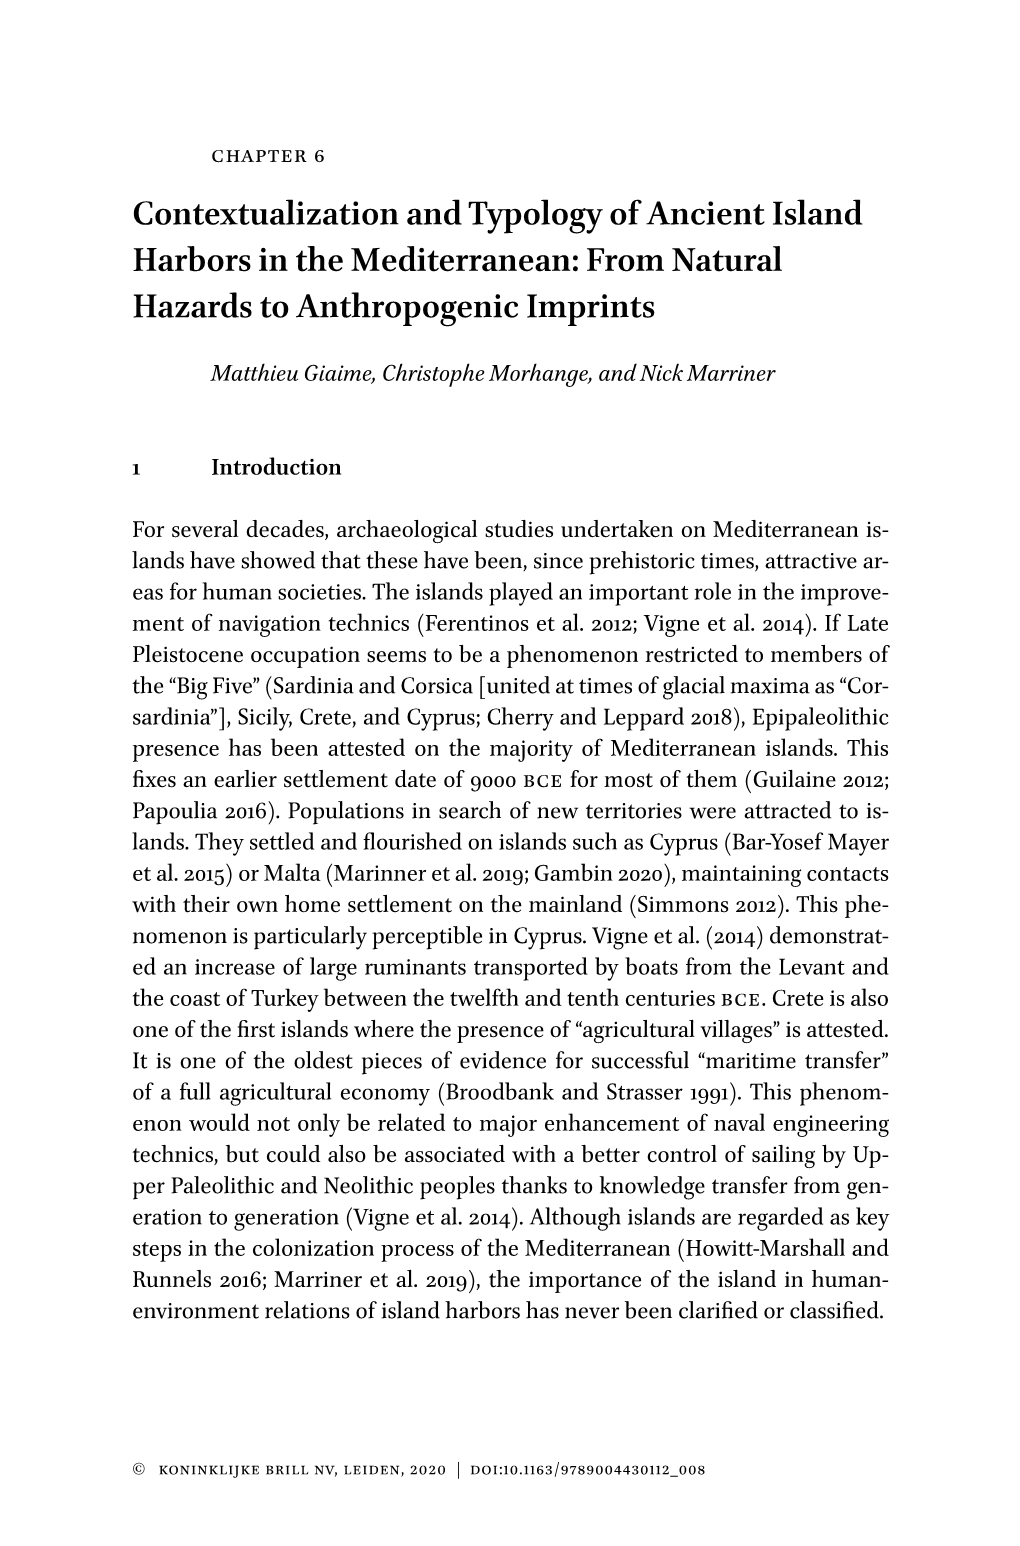 Contextualization and Typology of Ancient Island Harbors in the Mediterranean: from Natural Hazards to Anthropogenic Imprints